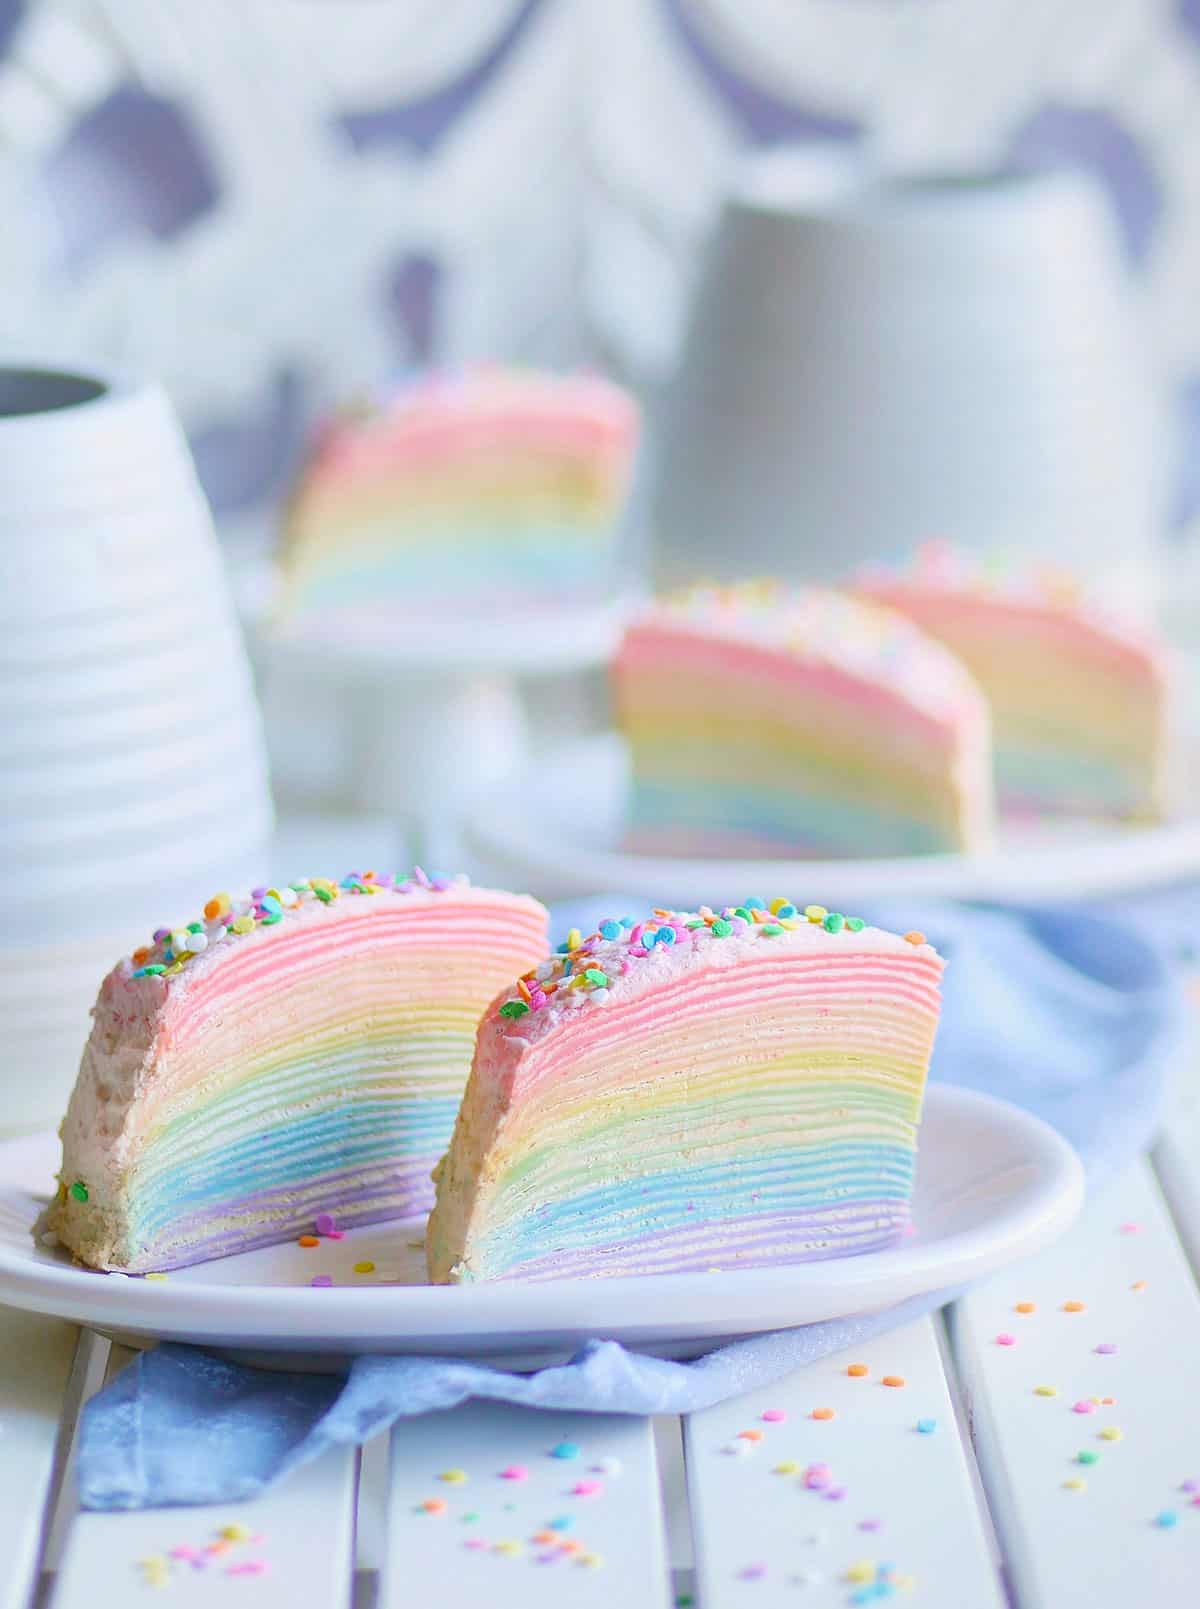 Close-up shot of rainbow mille crepe cake showing all 30-layers of the crepe with a thin layer of cream filling in between. 